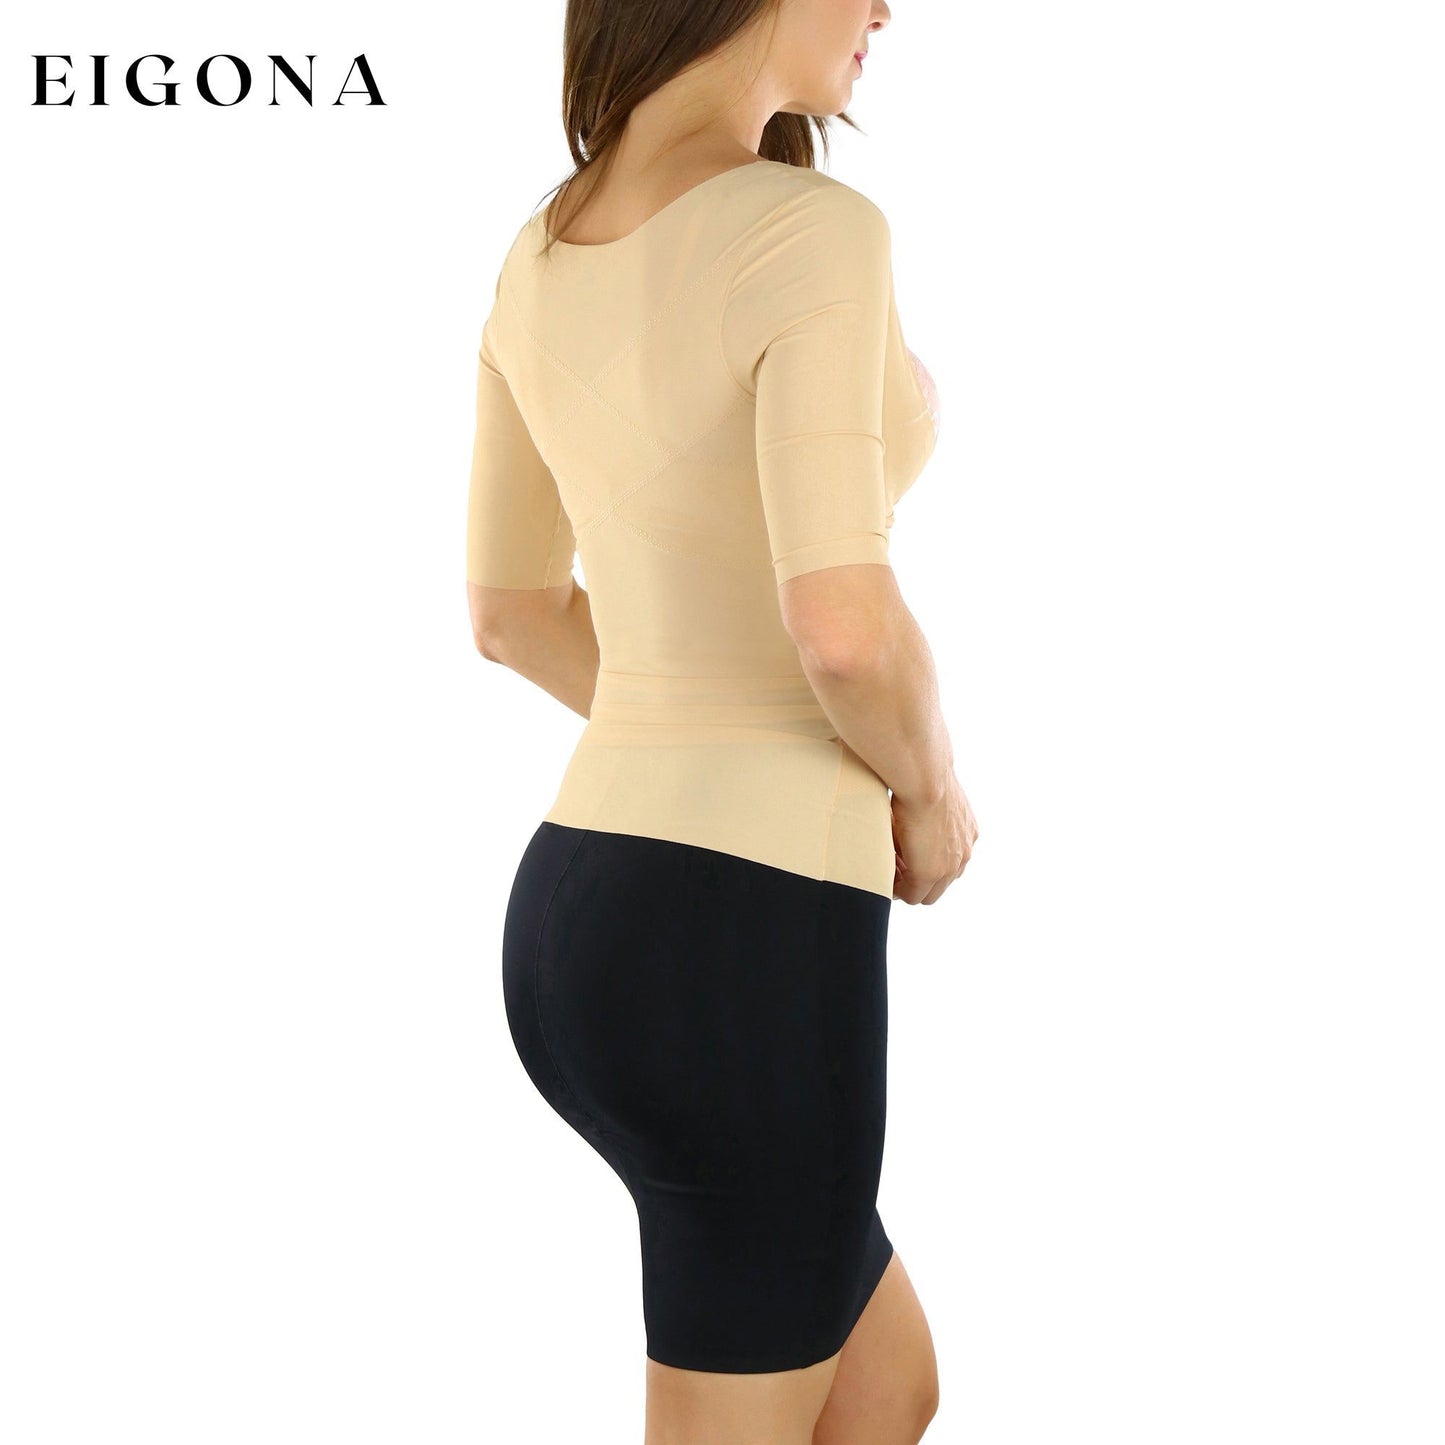 Women's Arm Shaper Slimming Blouse __stock:250 clothes refund_fee:1200 tops